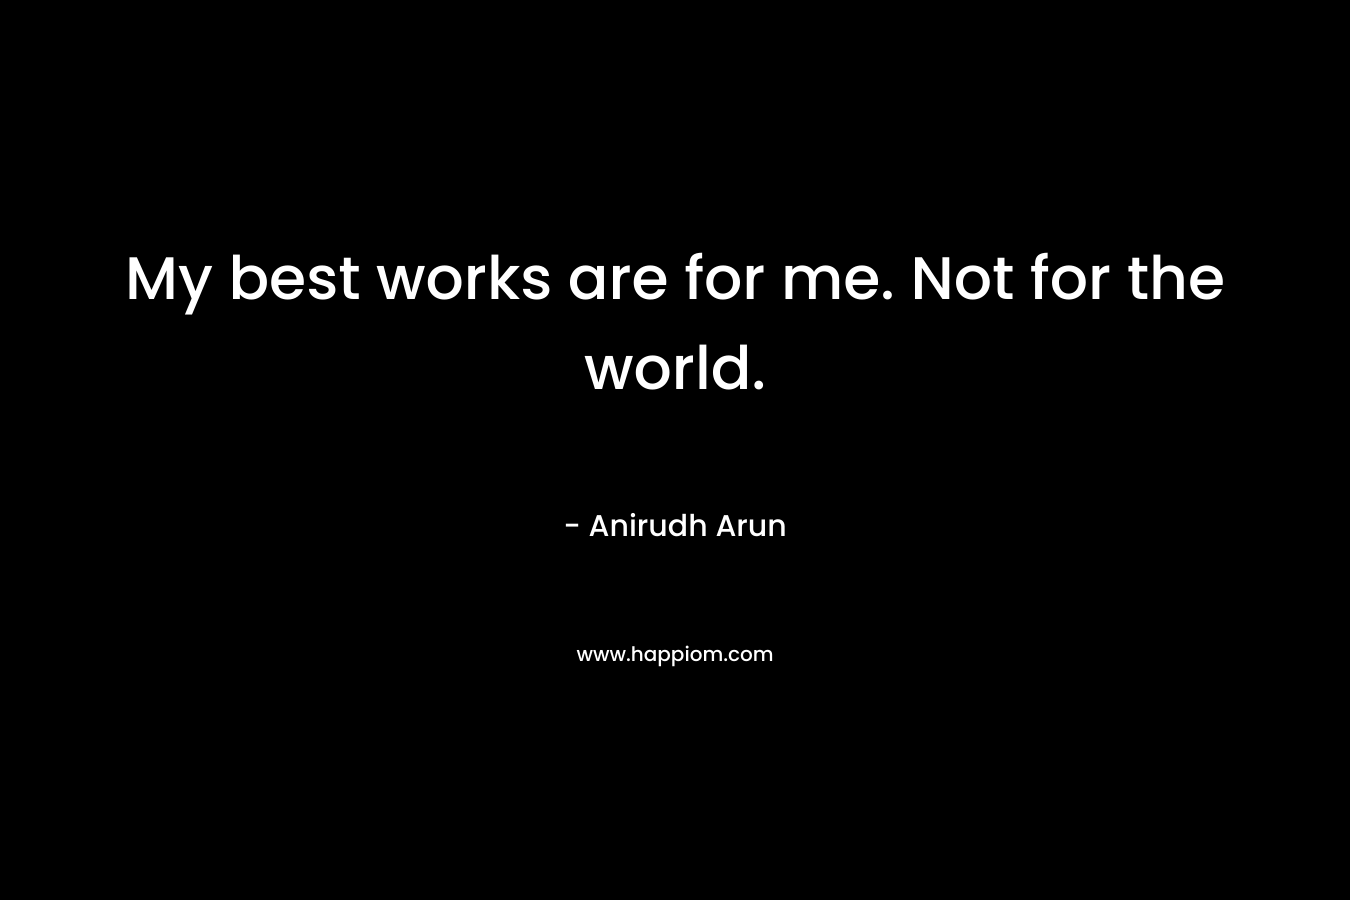 My best works are for me. Not for the world. – Anirudh Arun